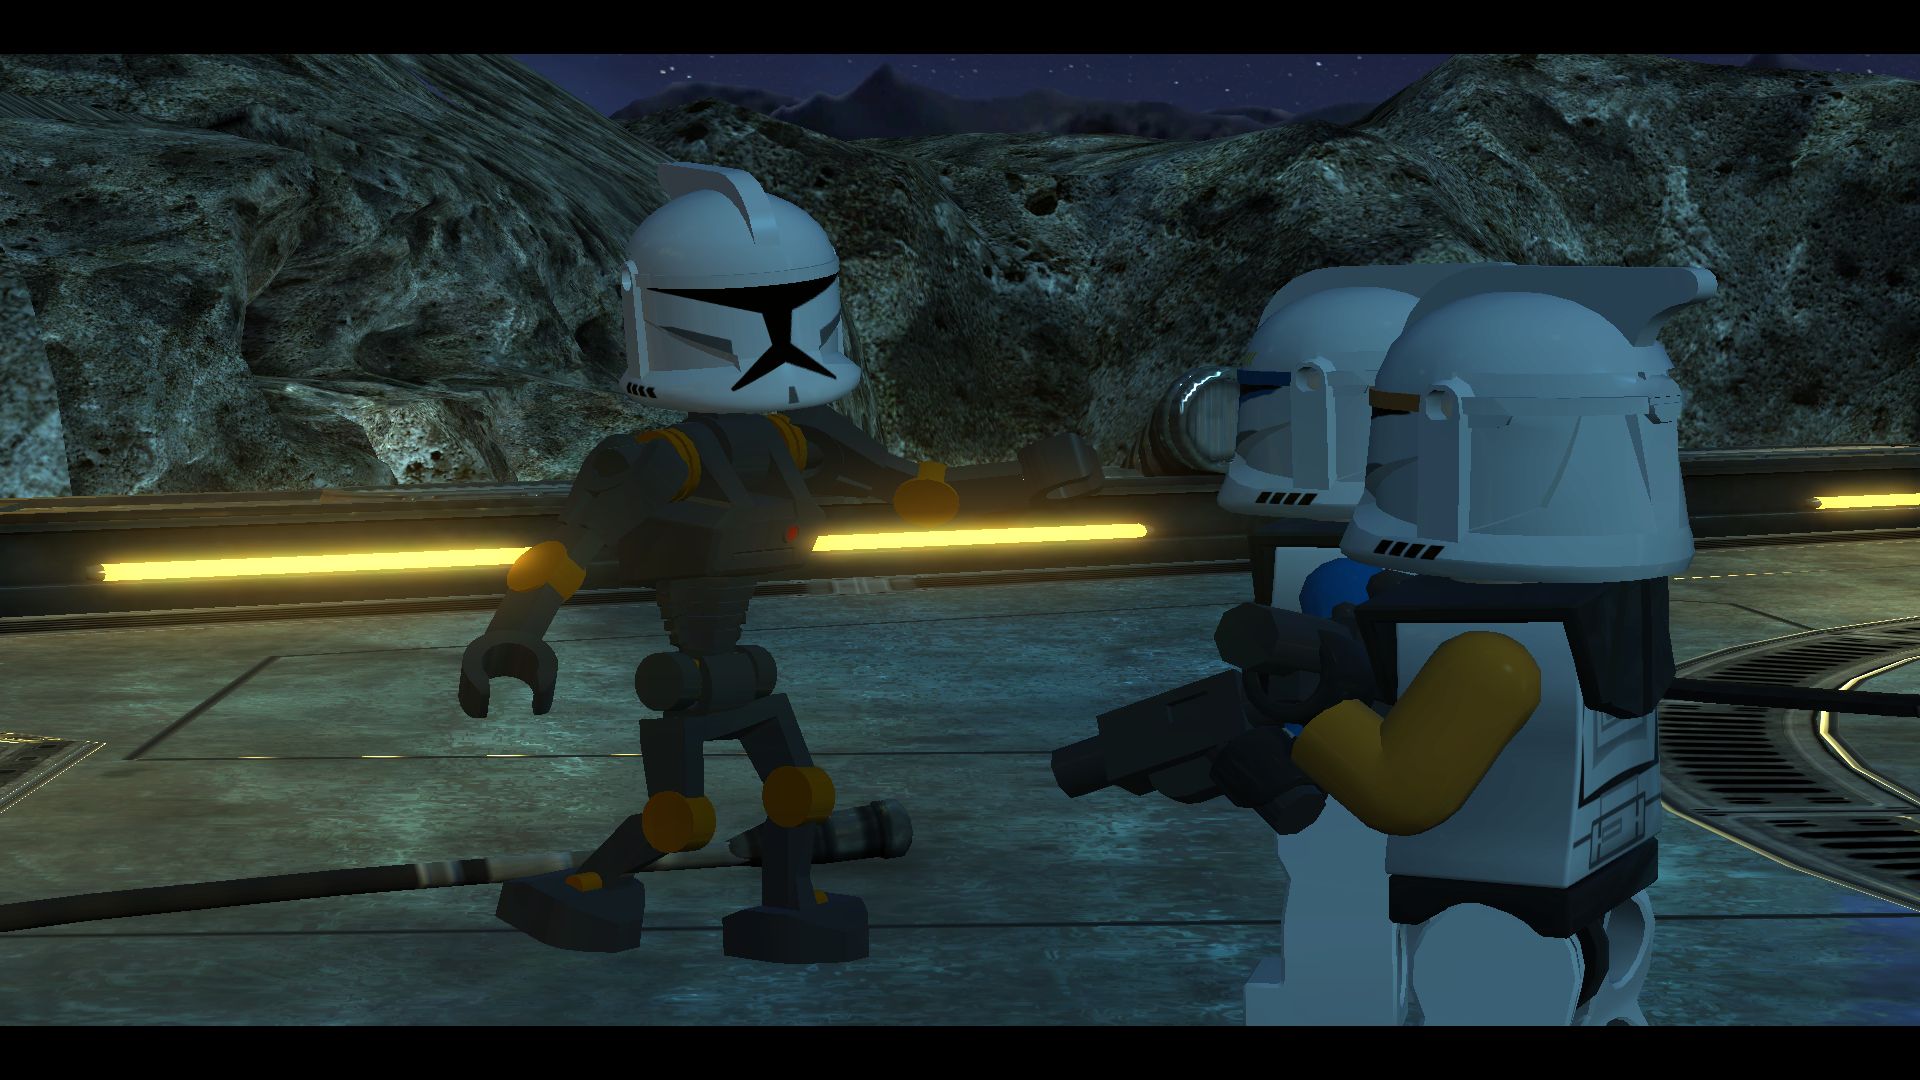 Bevidst Vise dig Støt Save 75% on LEGO® Star Wars™ III - The Clone Wars™ on Steam